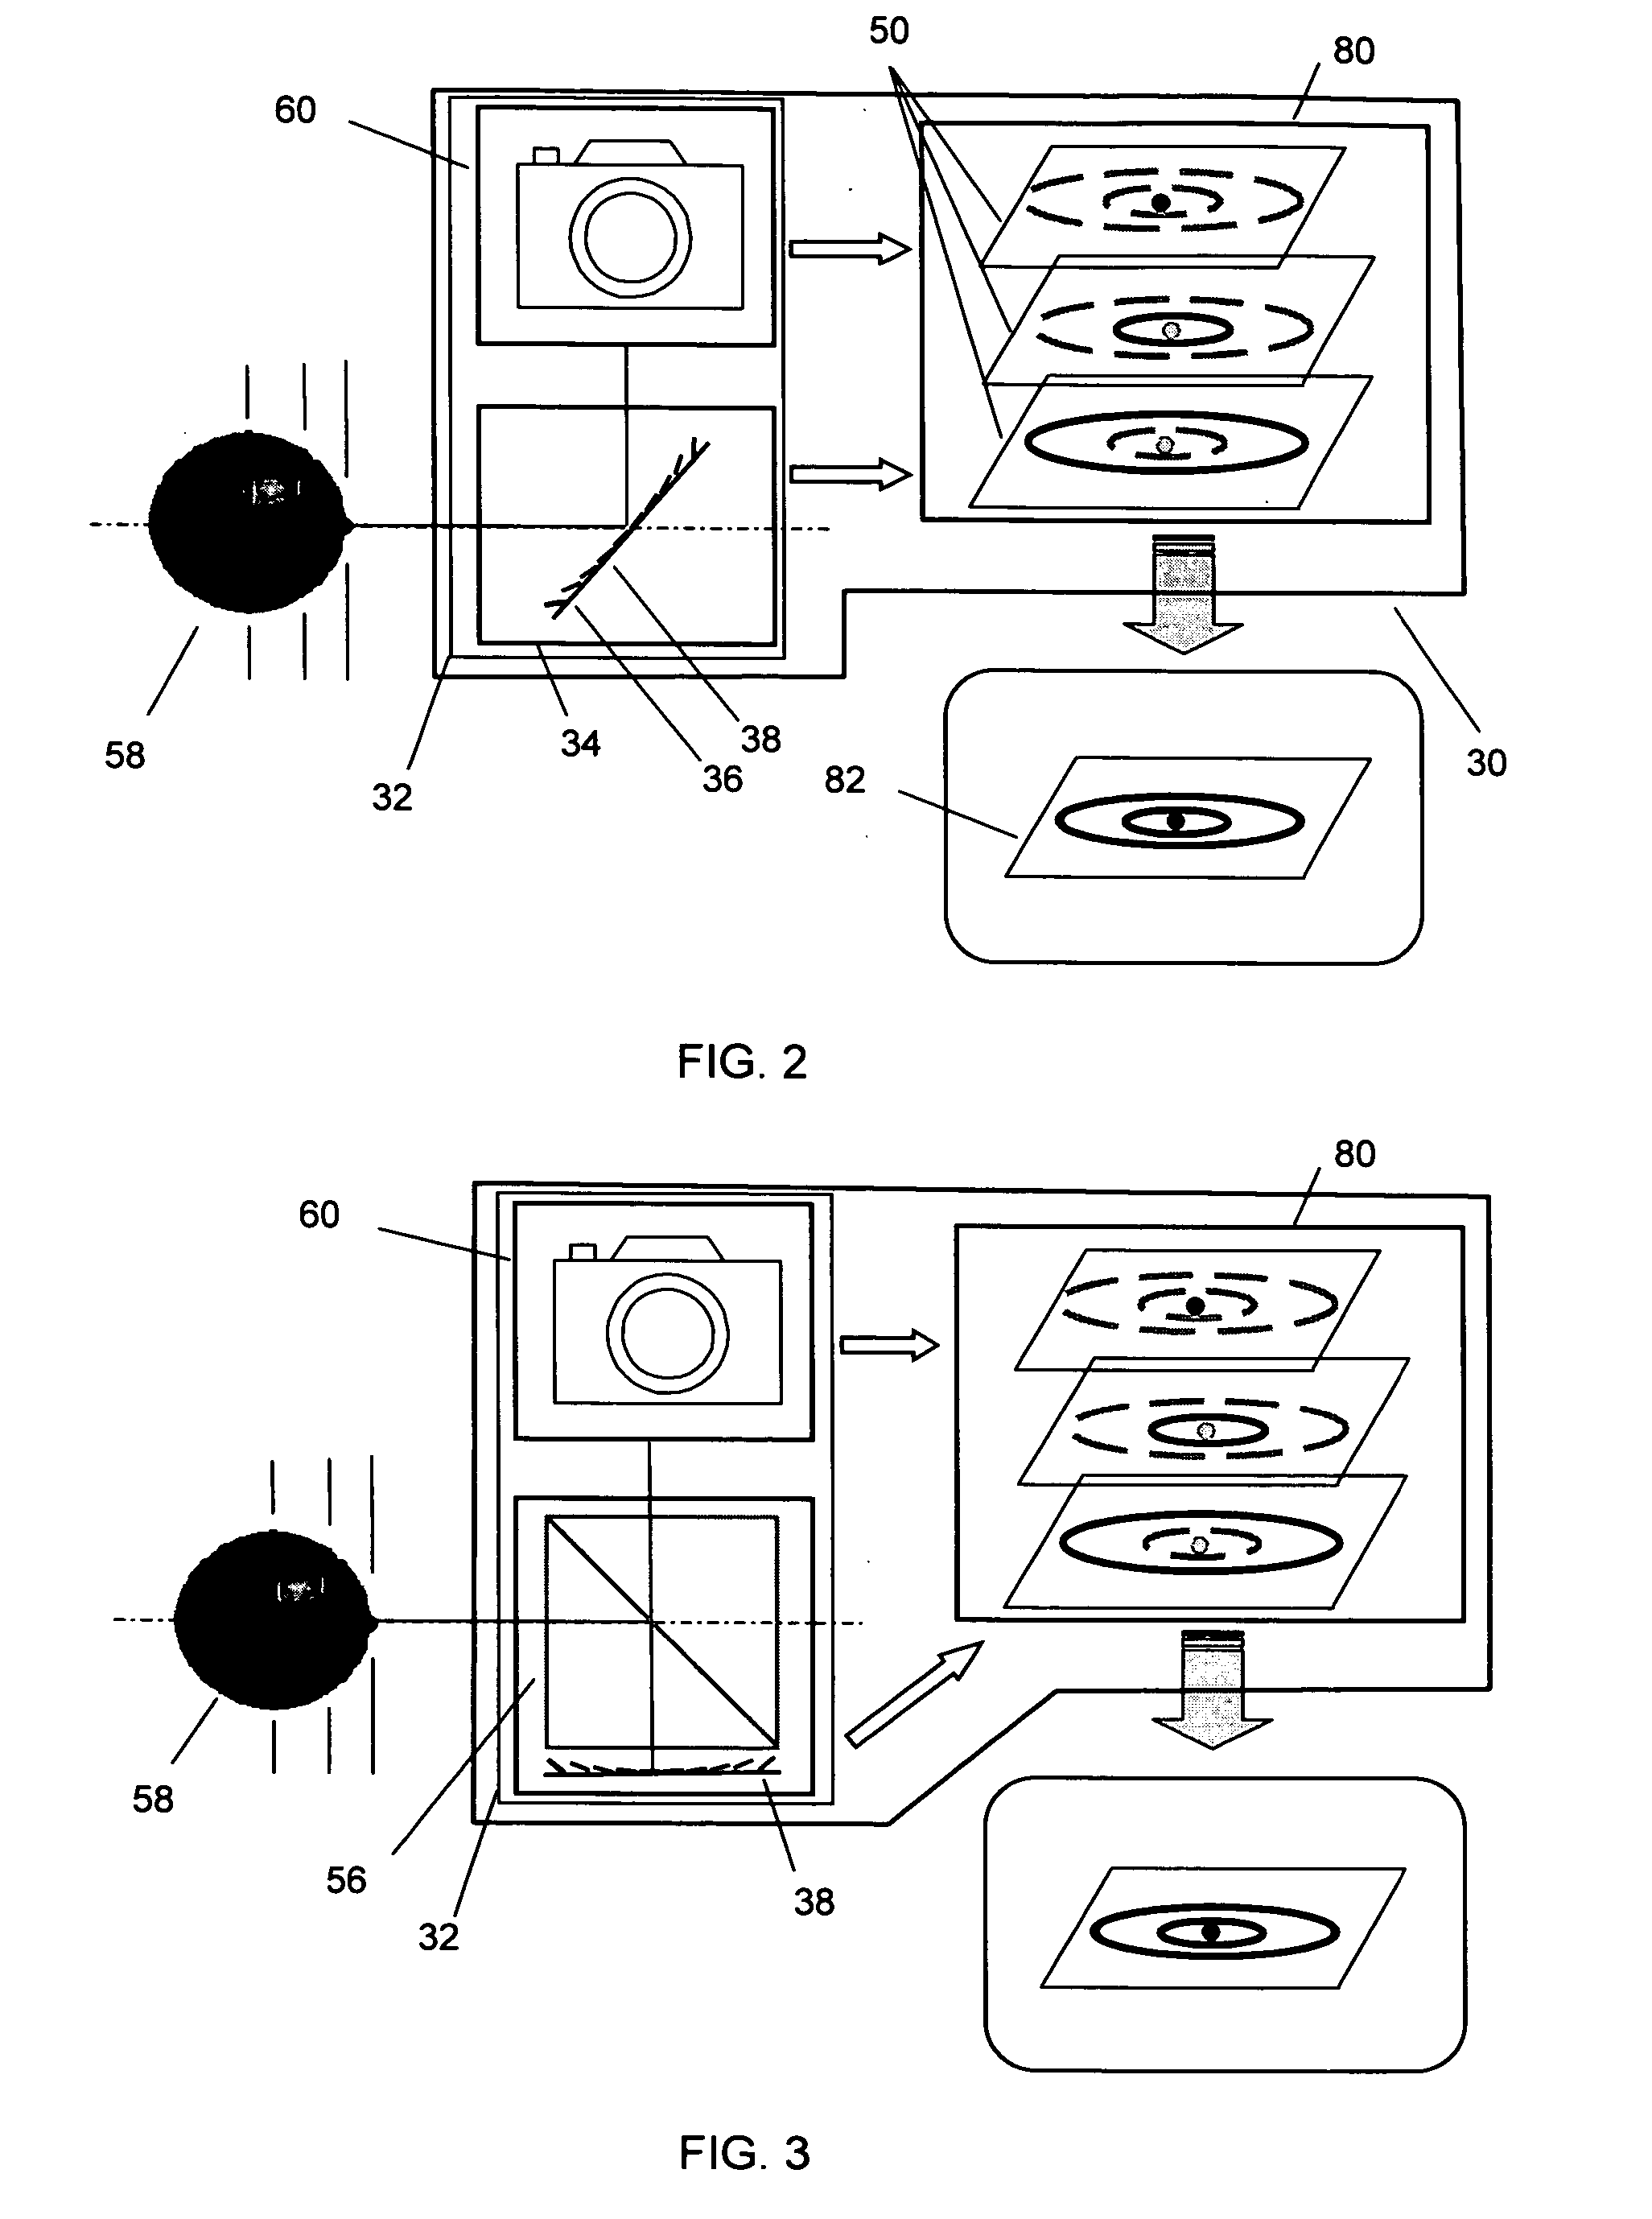 3D television broadcasting system